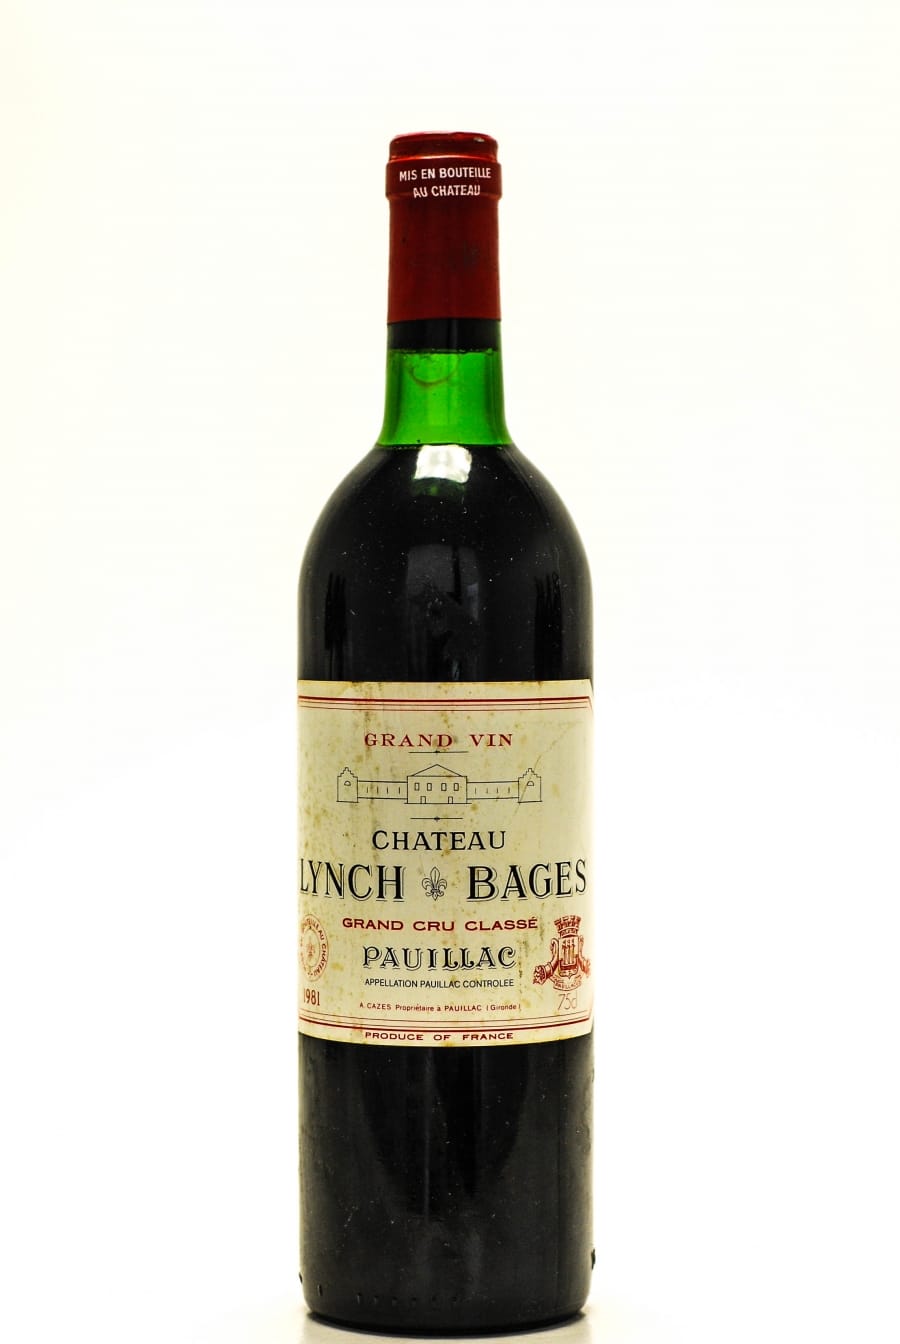 Chateau Lynch Bages - Chateau Lynch Bages 1981